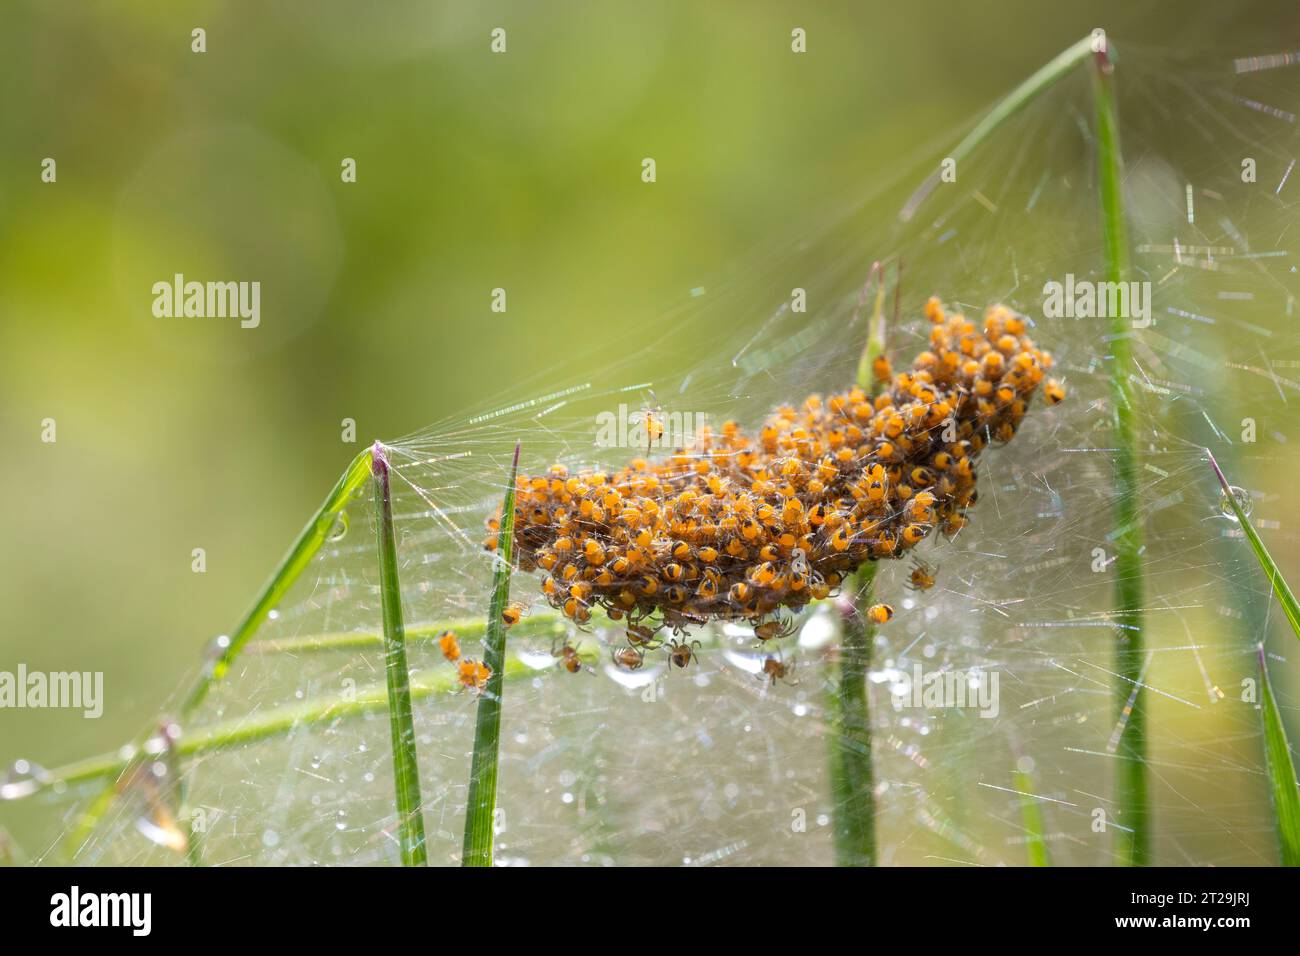 nest of yellow spiders, thousands of them piled up in a perfect silk sack held in the grass with dewdrops, green background. Copy space. Stock Photo